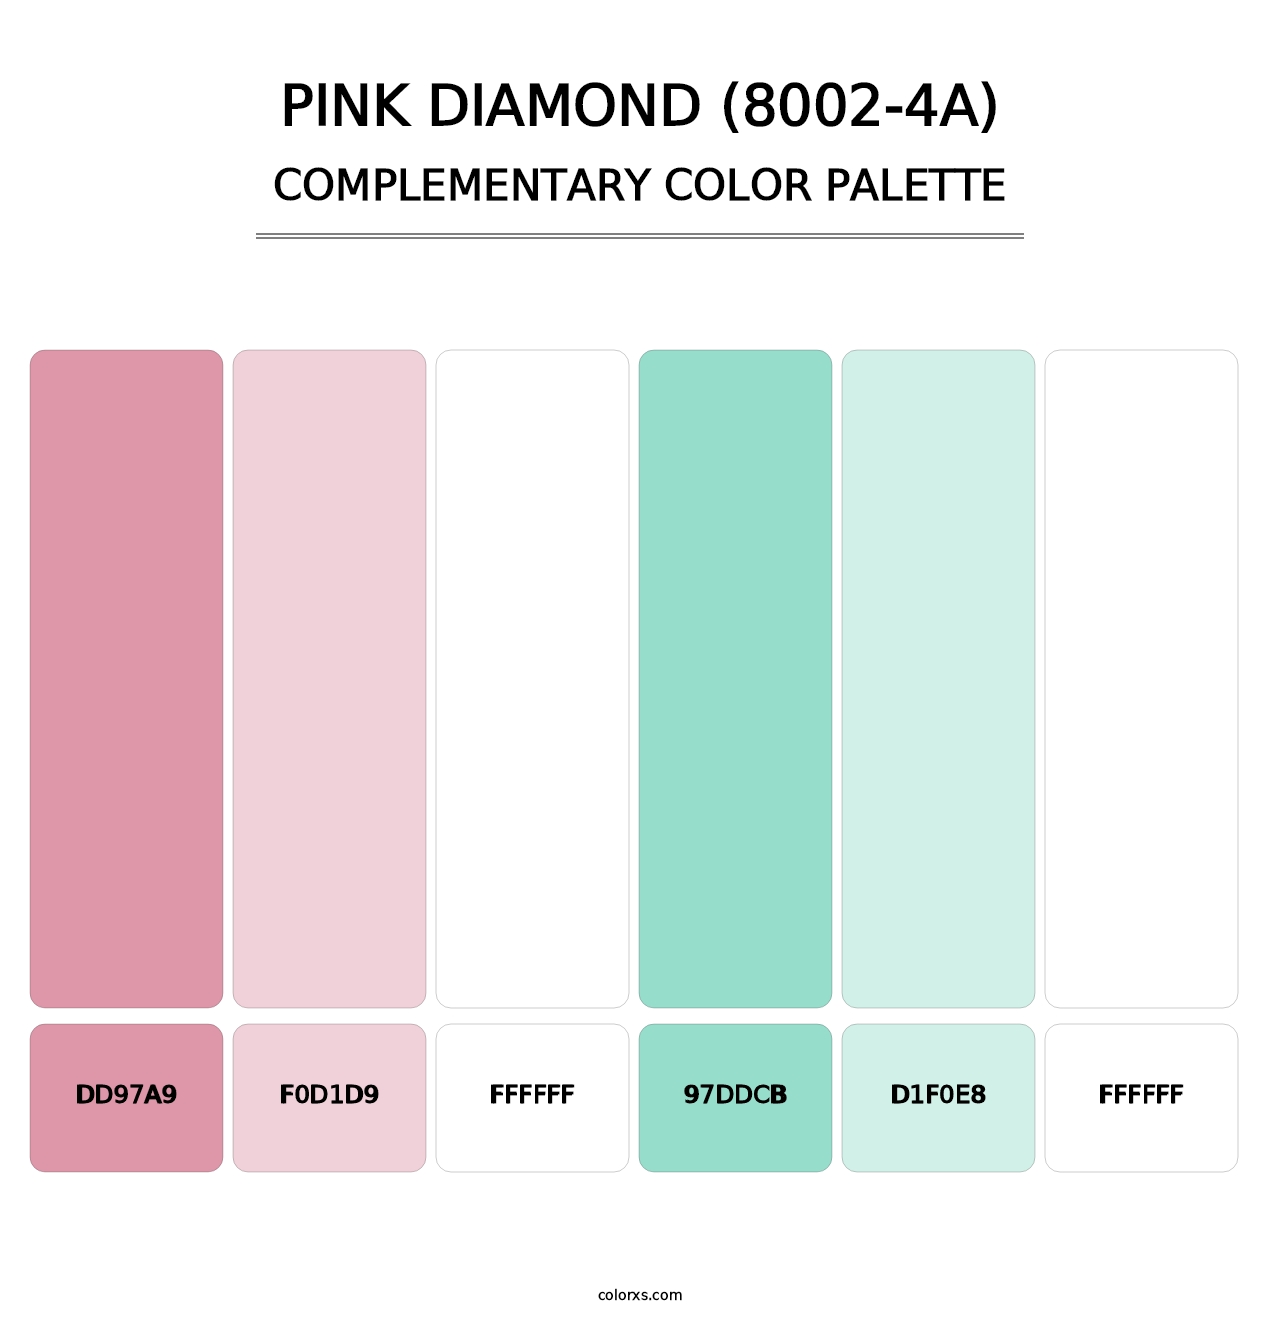 Pink Diamond (8002-4A) - Complementary Color Palette